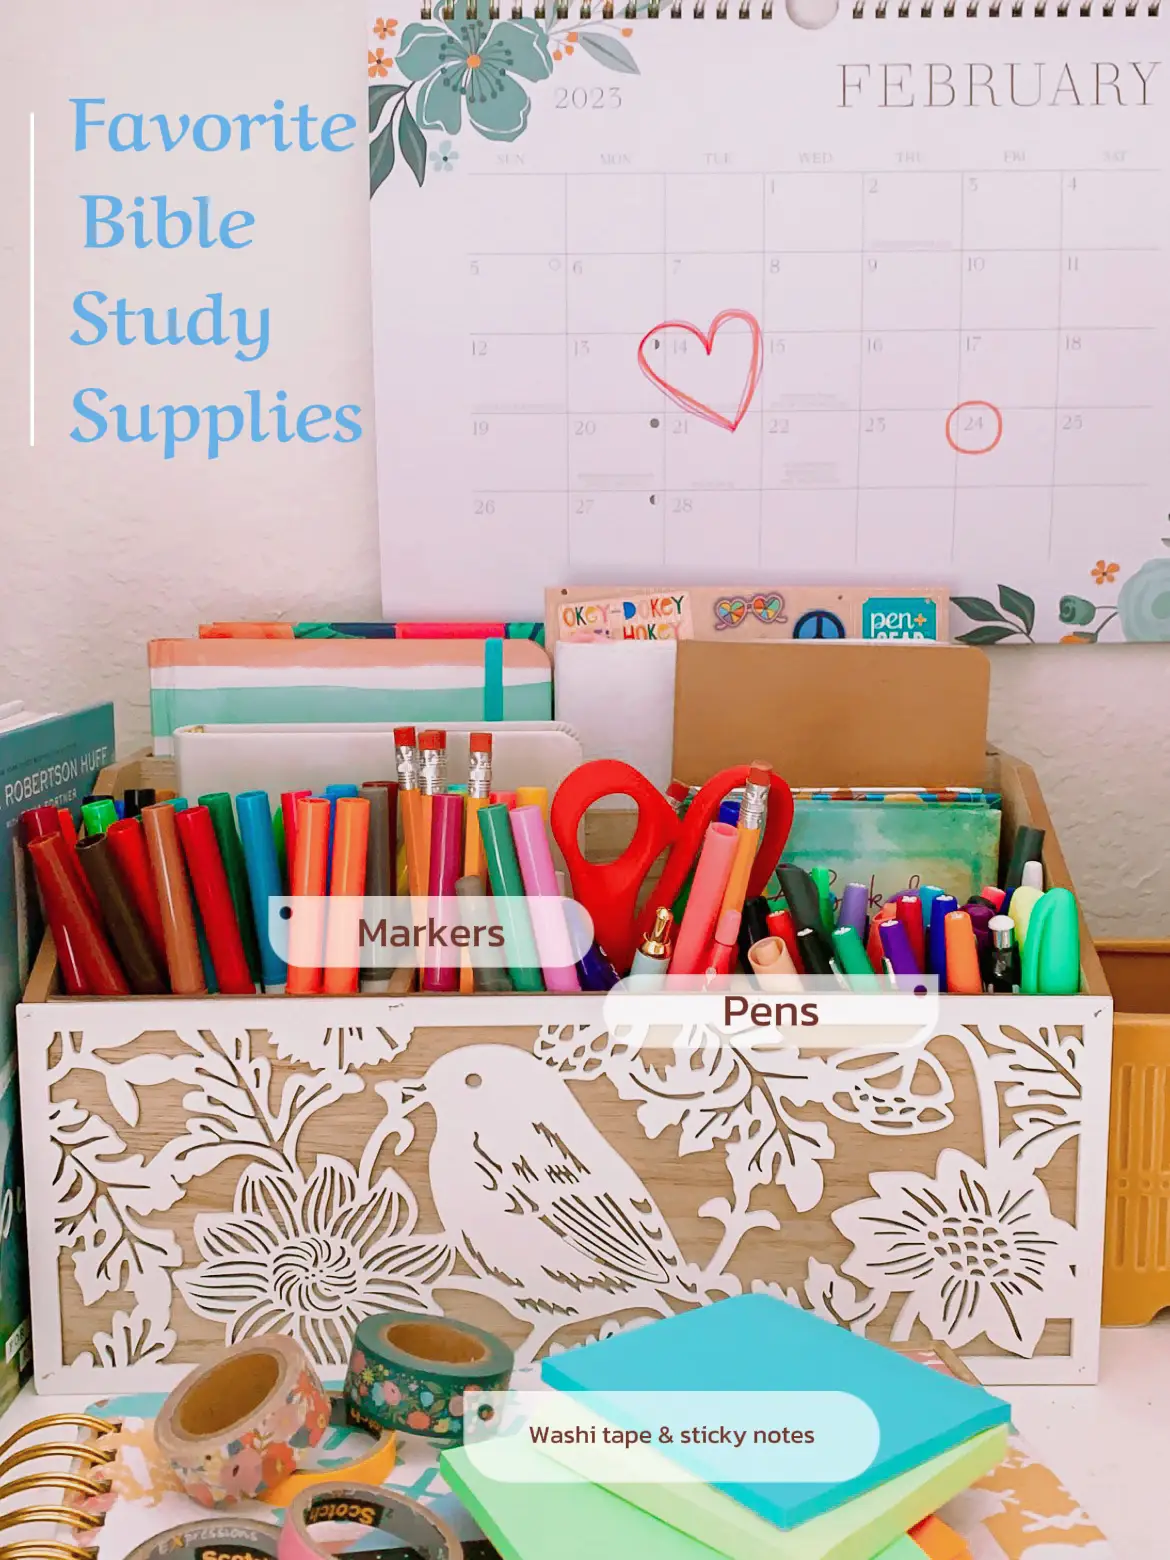 My Favorite Bible Study Supplies! 🤩, Gallery posted by Ashley Duran